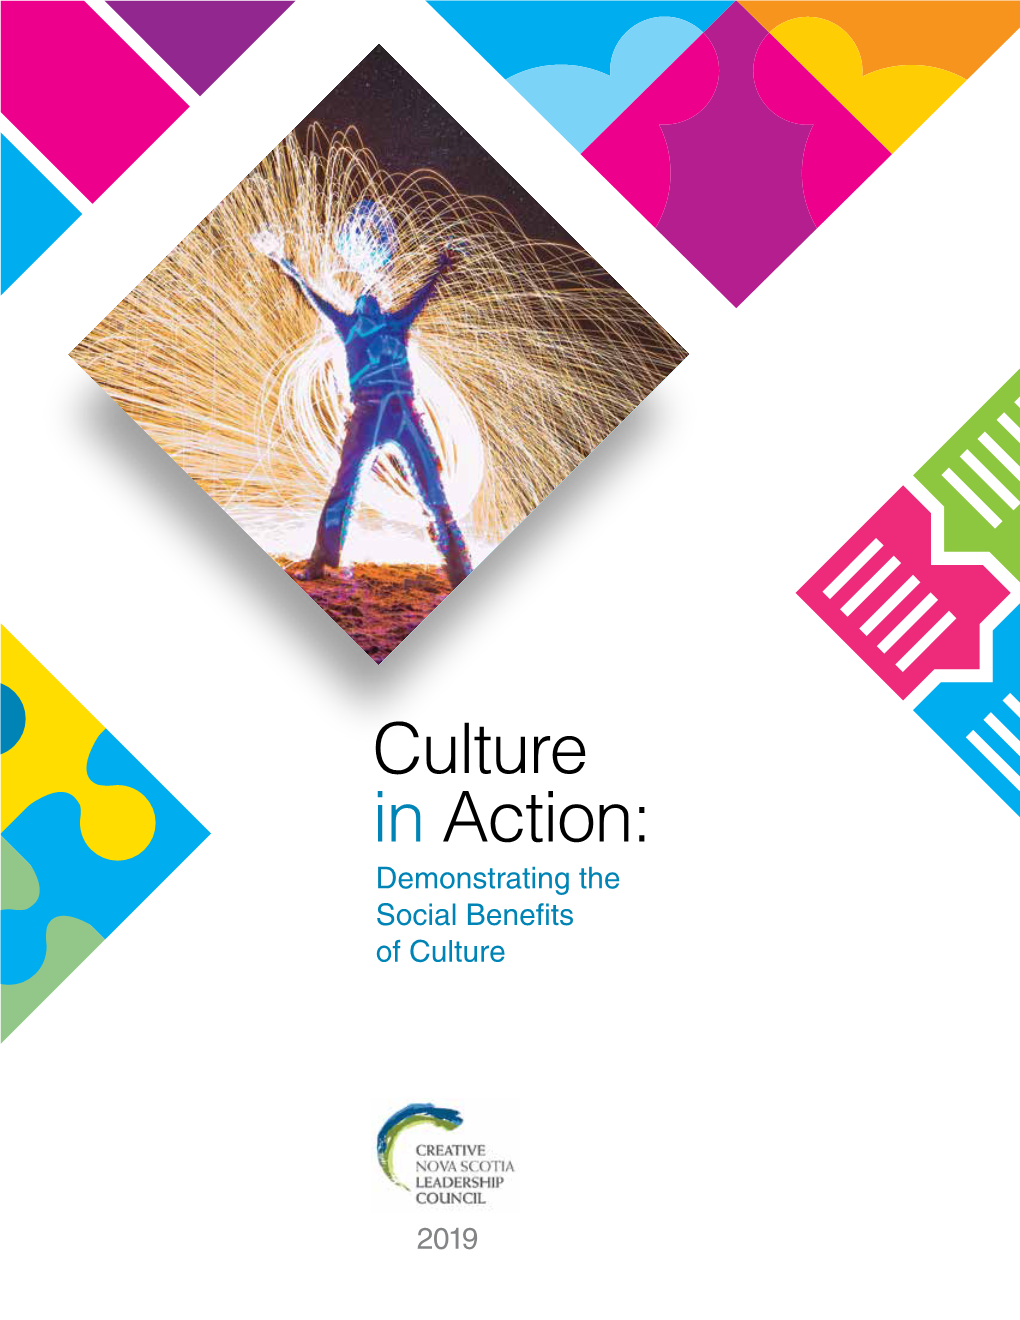 In Action: Demonstrating the Social Benefits of Culture